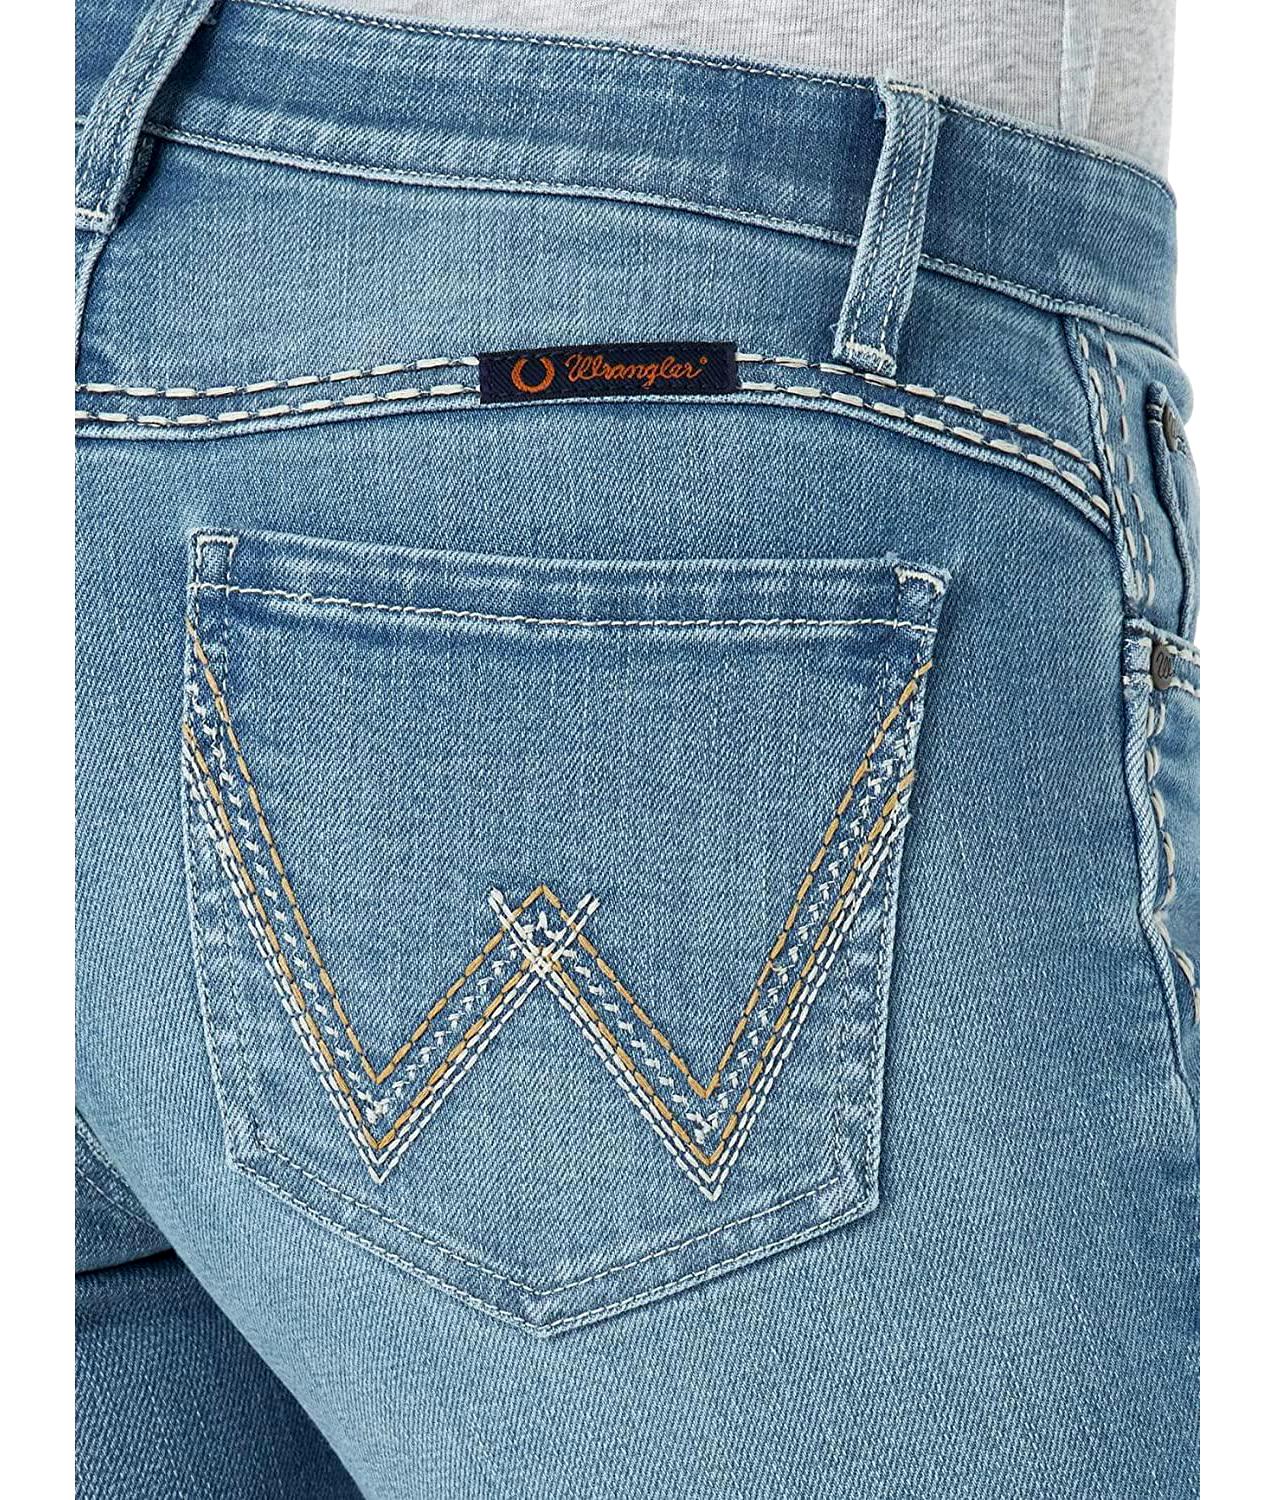 Wrangler Shiloh Low Rise Ultimate Riding Jeans in Hallie